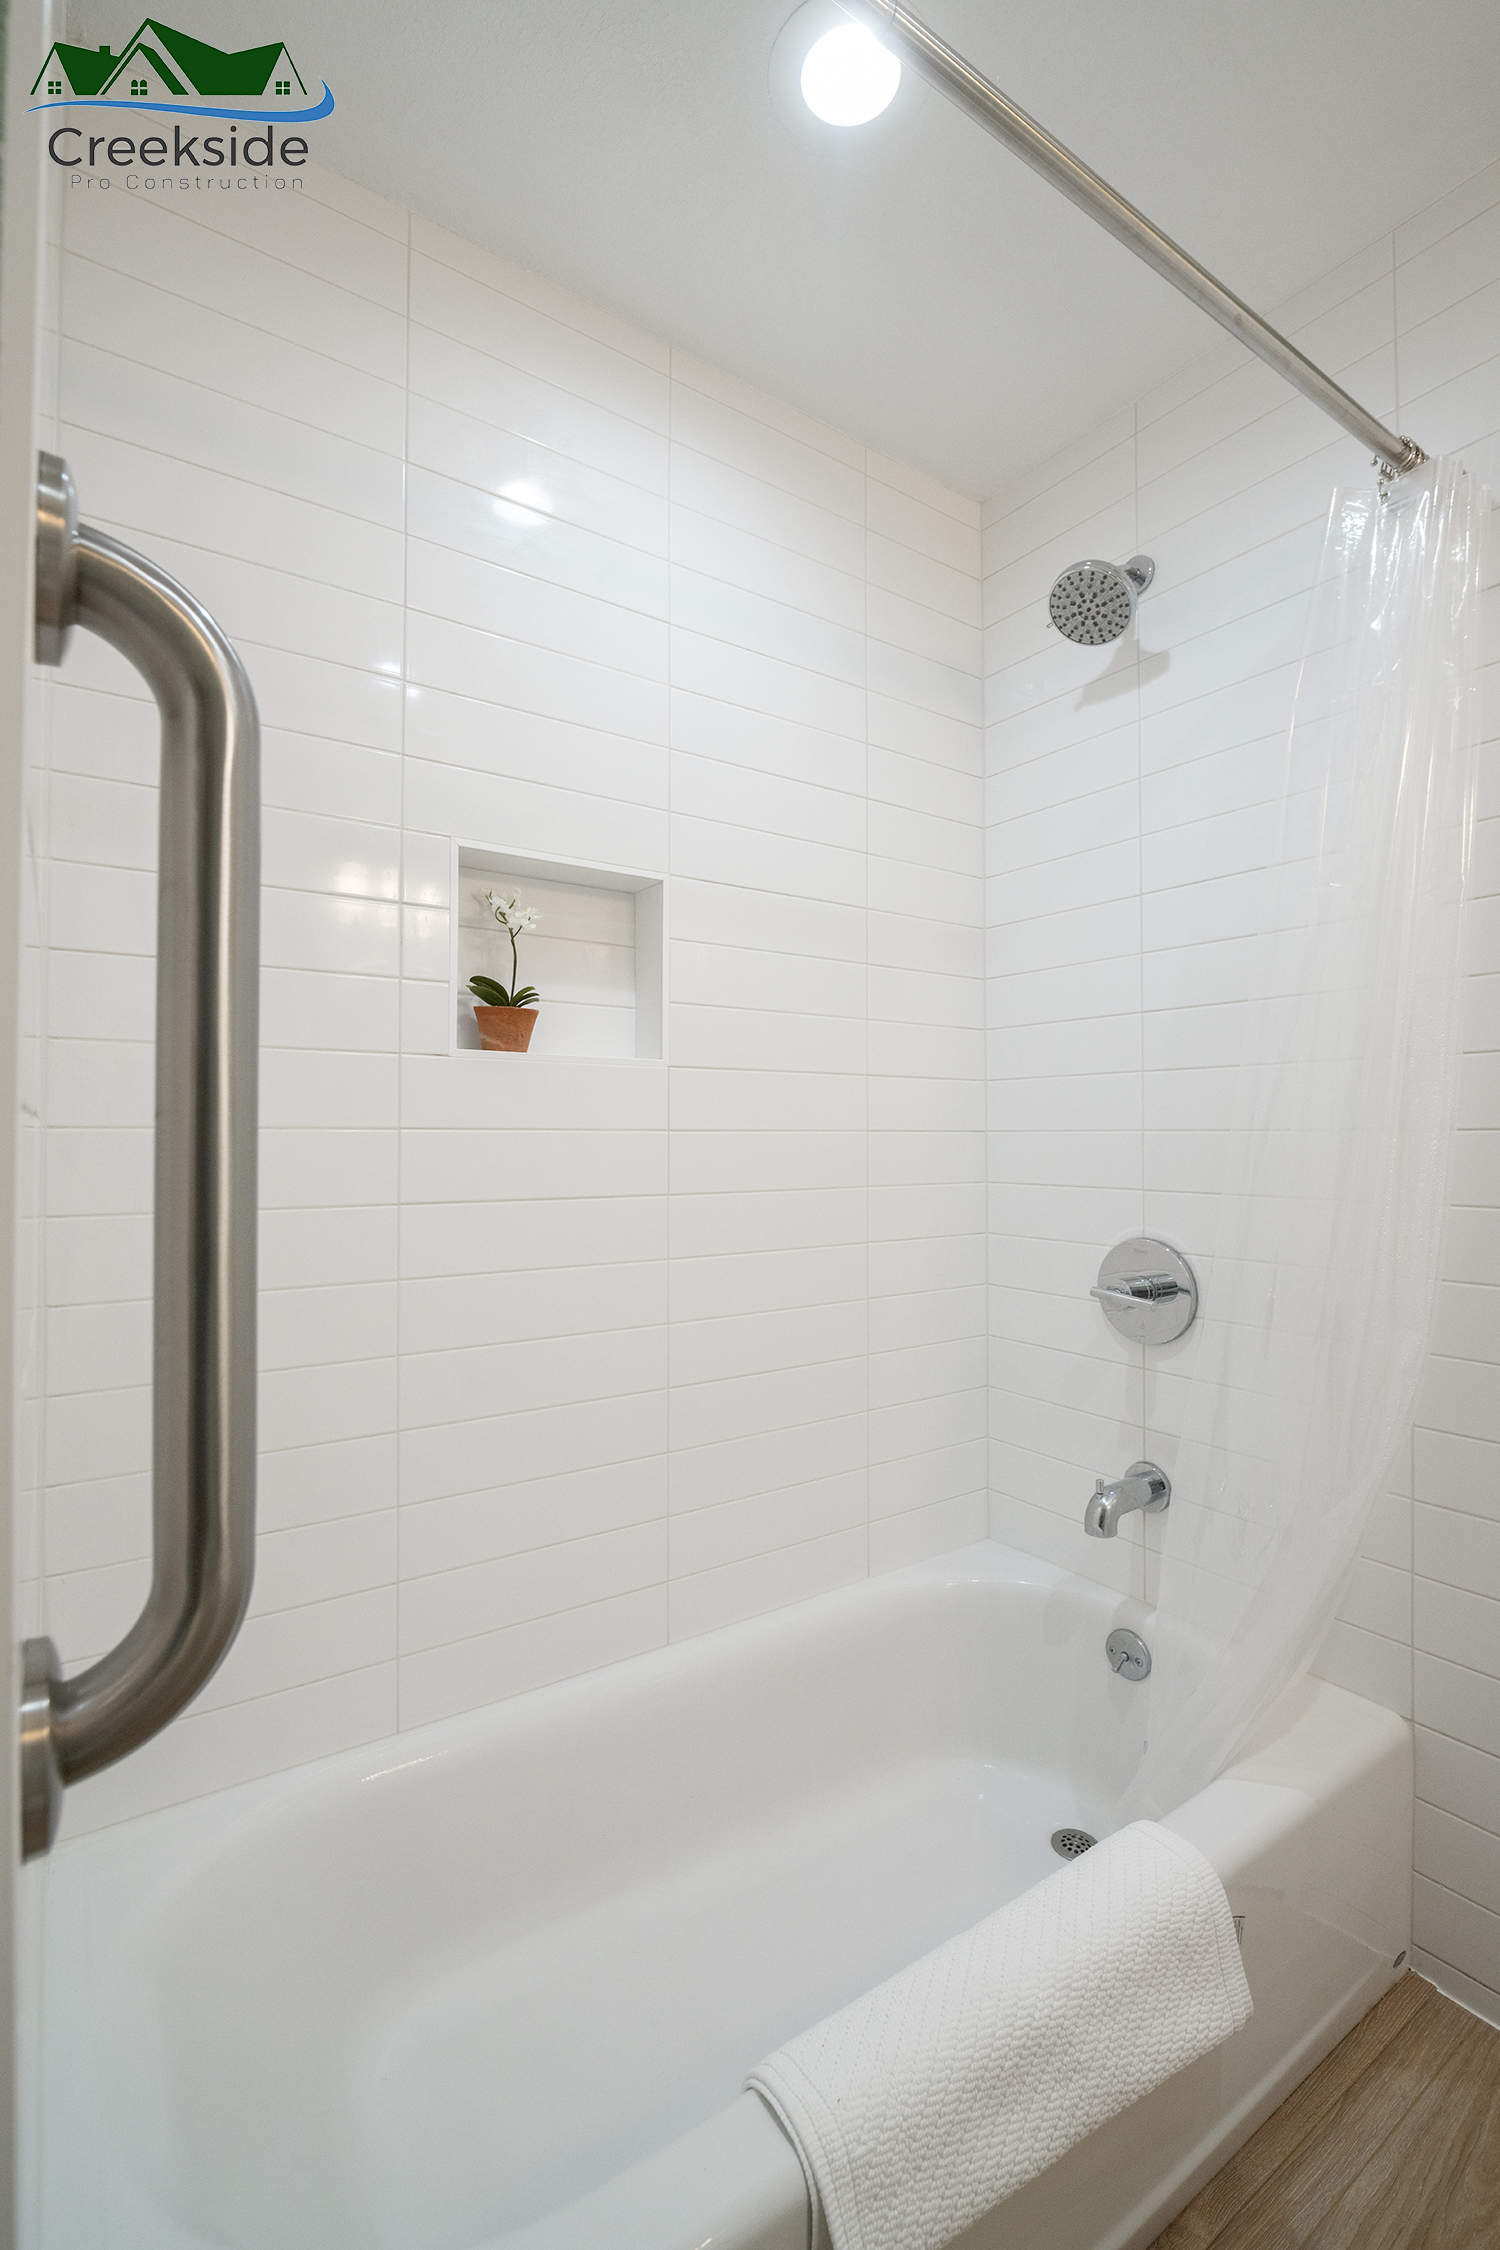 renovated bathroom shower with white tiles, and chrome finishes.